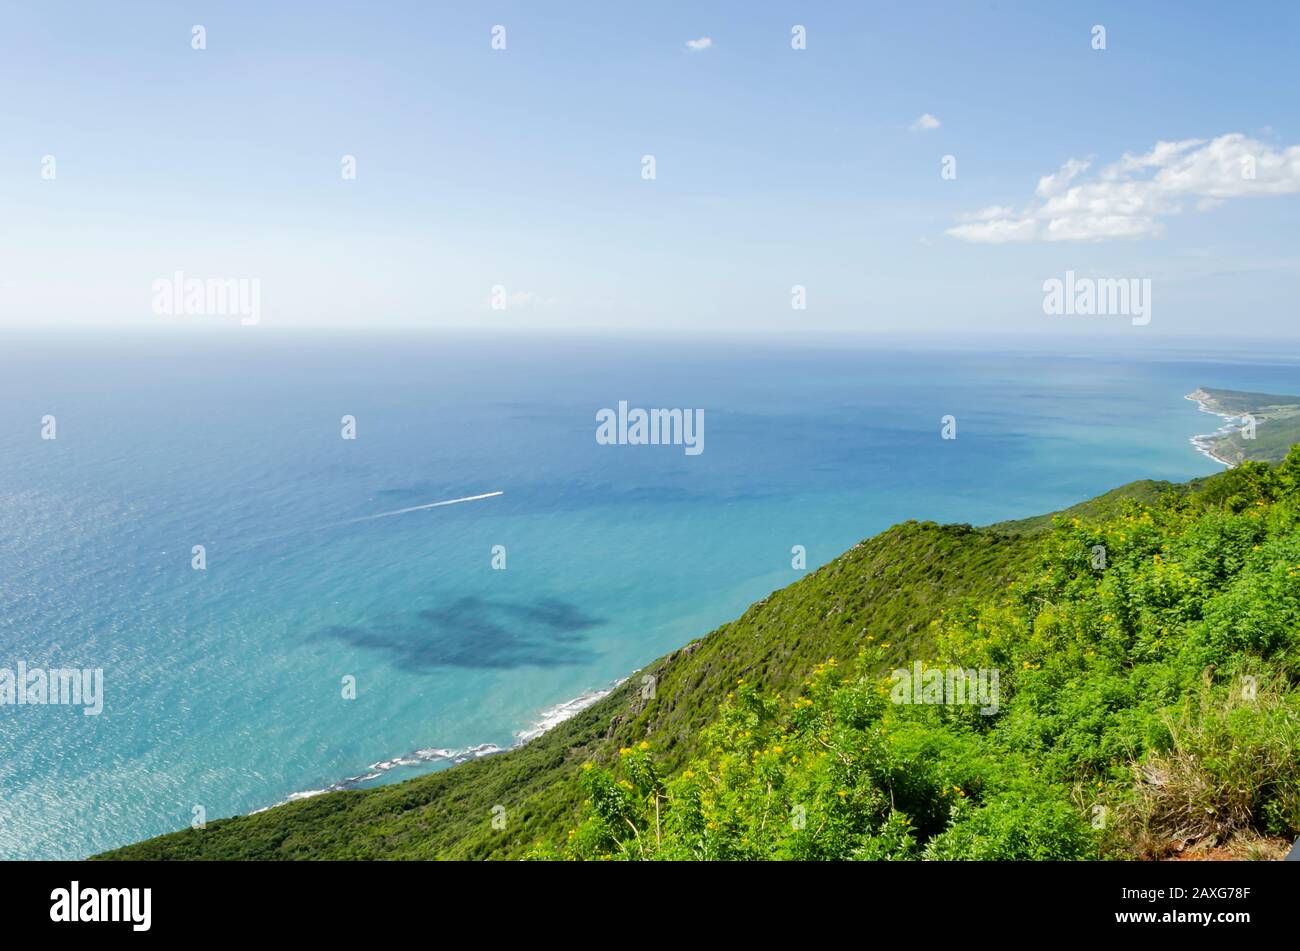 Green Coastline At The Foot Of A Cliff Stock Photo